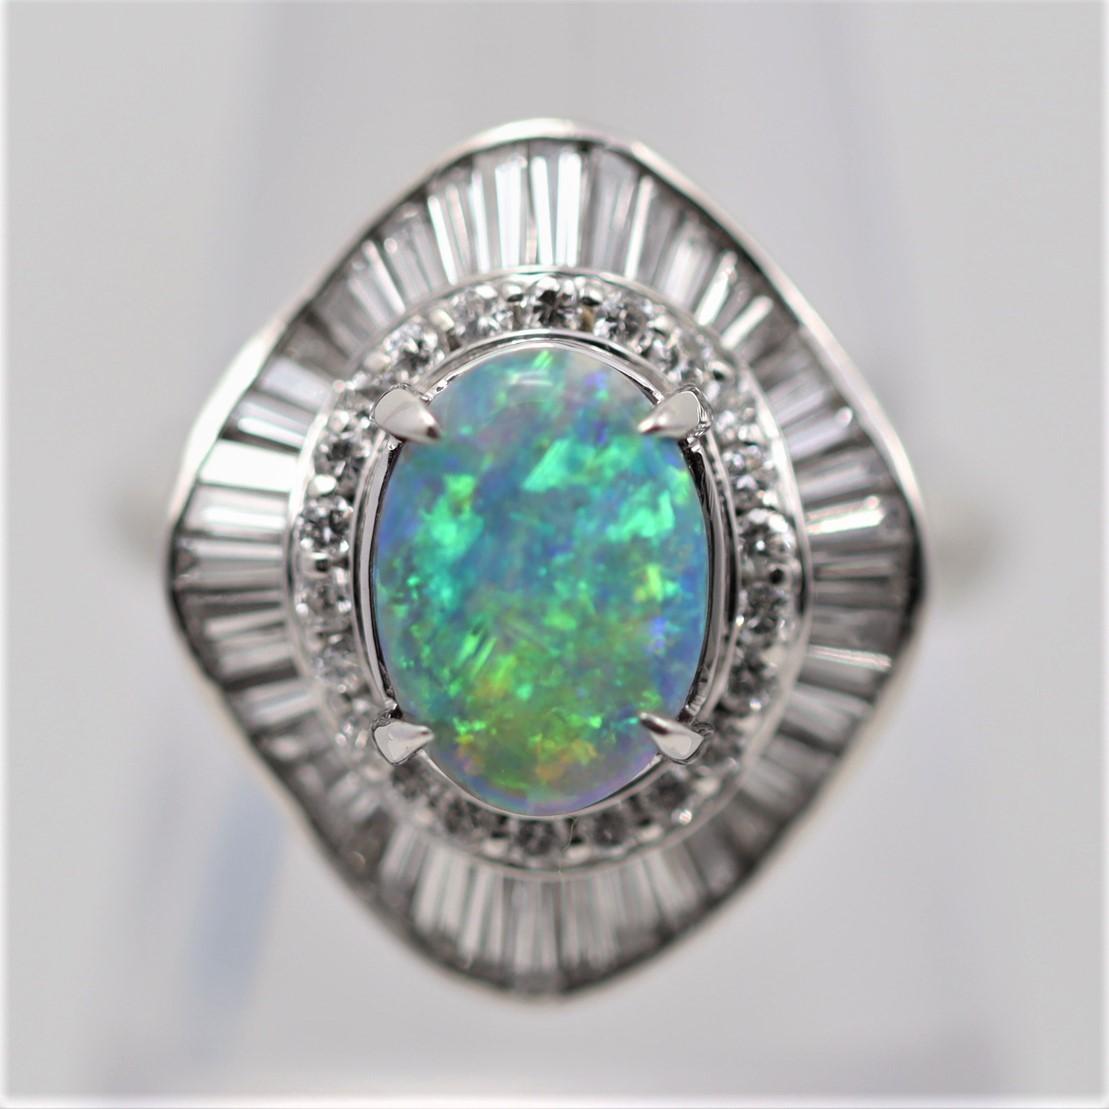 An exceptional natural Australian black opal weighing 1.99 carats takes center stage! It has fantastic play-of-color and bright strong flashes of greens, blues, oranges, and yellows dance across the stone as it is tilted. It is accented by 1.27